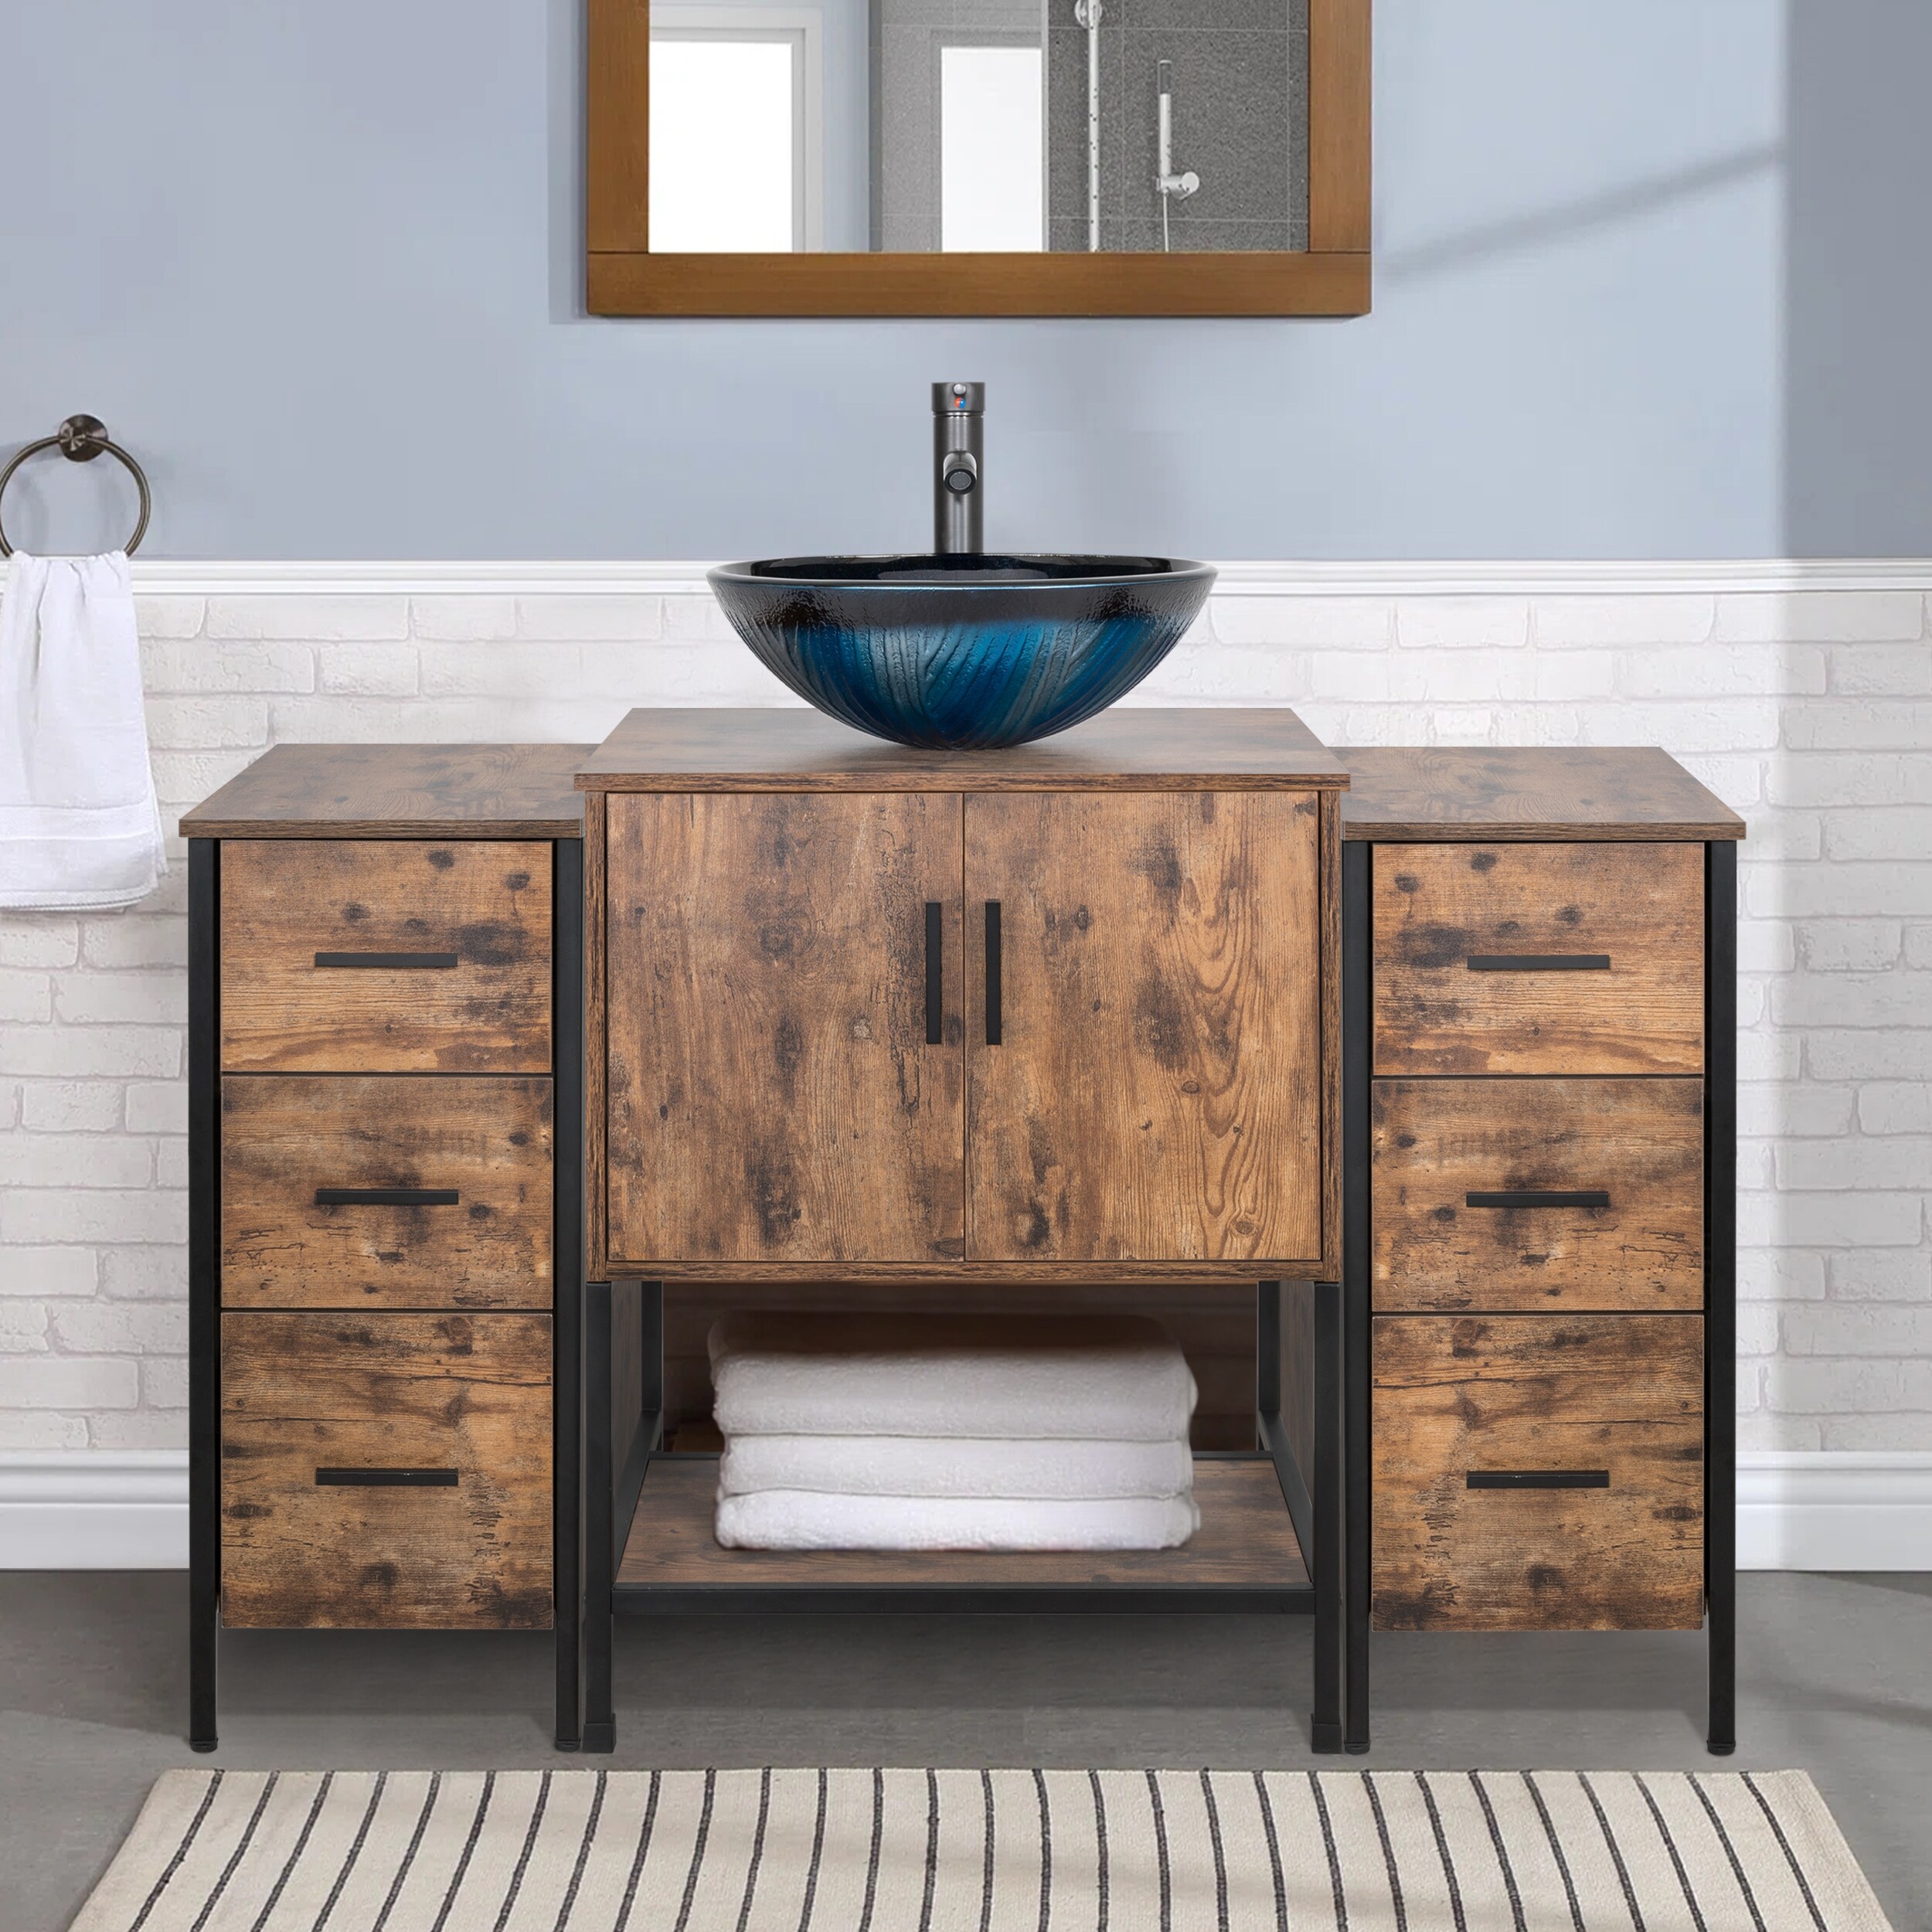 https://ak1.ostkcdn.com/images/products/is/images/direct/ace06d6dcd802550d5f035e0a1ee063405260592/48%22-Bathroom-Vanity-Set-Organizer-Top-Vessel-Sink-W--Faucet-Drain-Cabinet-Combo.jpg